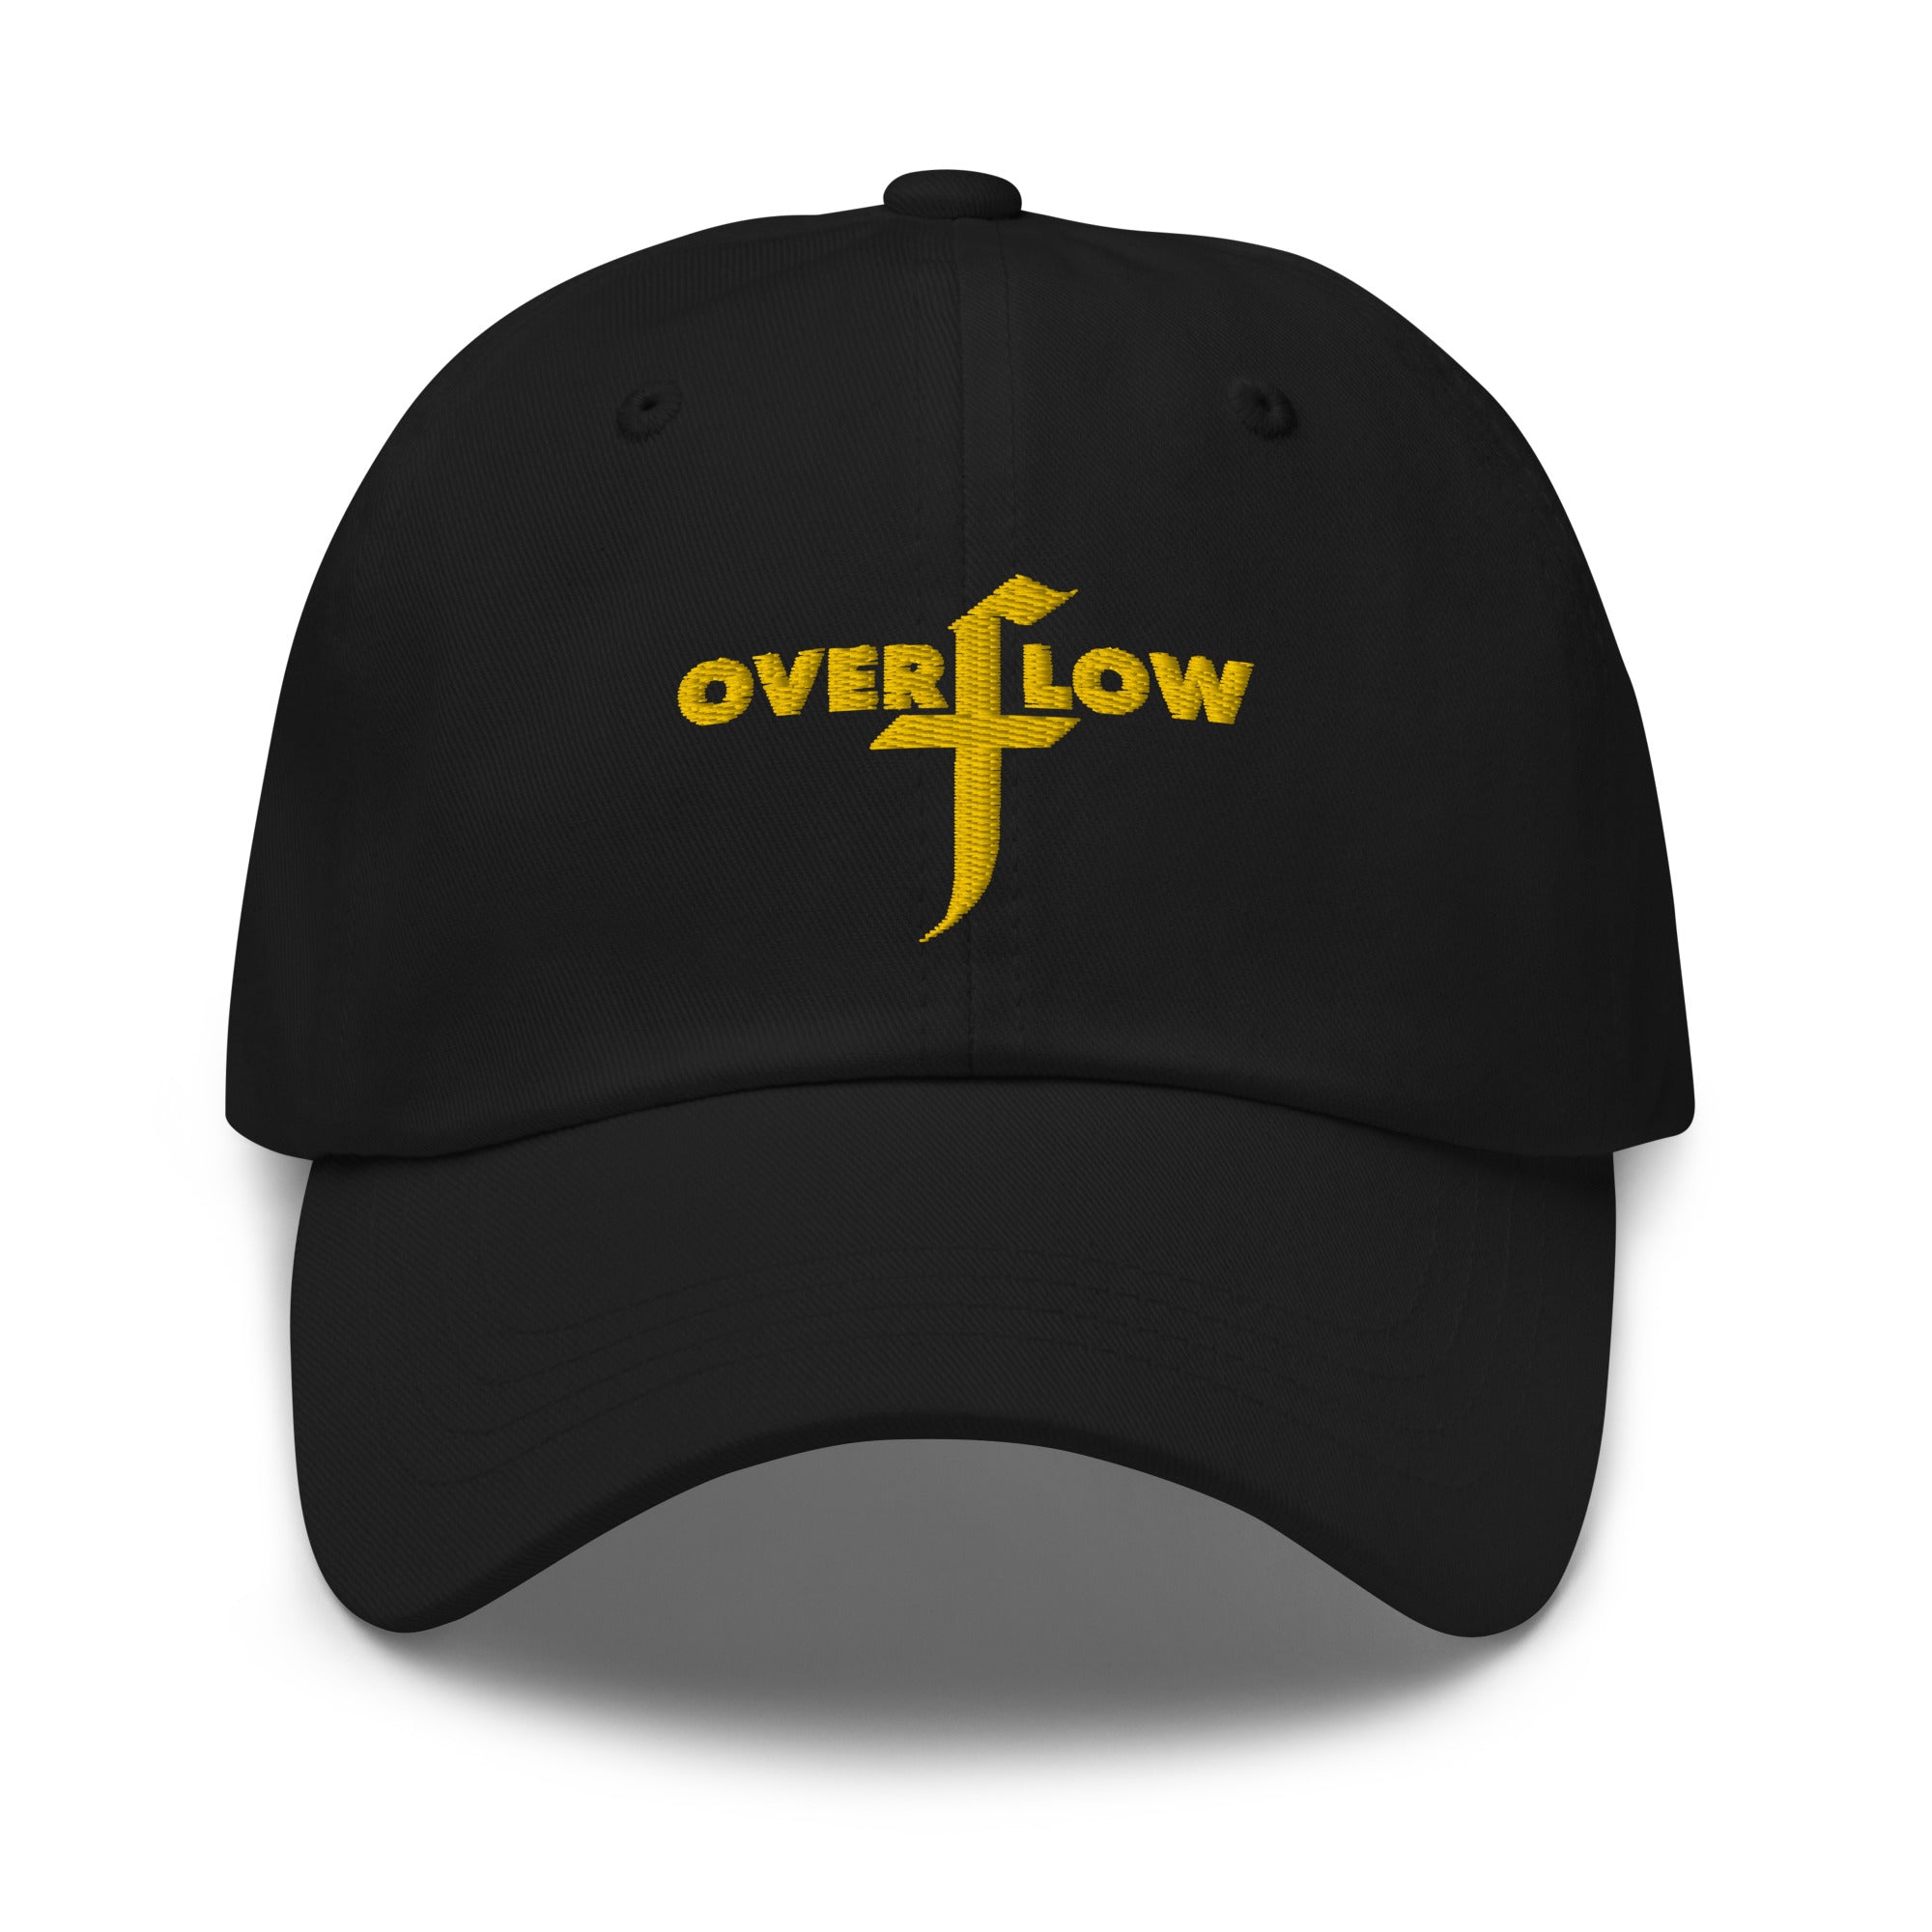 Overflow Dad Hat, Used By God, Used By God Clothing, Christian Apparel, Christian Hats, Christian T-Shirts, Christian Clothing, God Shirts, Christian Sweatshirts, God Clothing, Jesus Hoodie, Jesus Clothes, God Is Dope, Art Of Homage, Red Letter Clothing, Elevated Faith, Active Faith Sports, Beacon Threads, God The Father Apparel